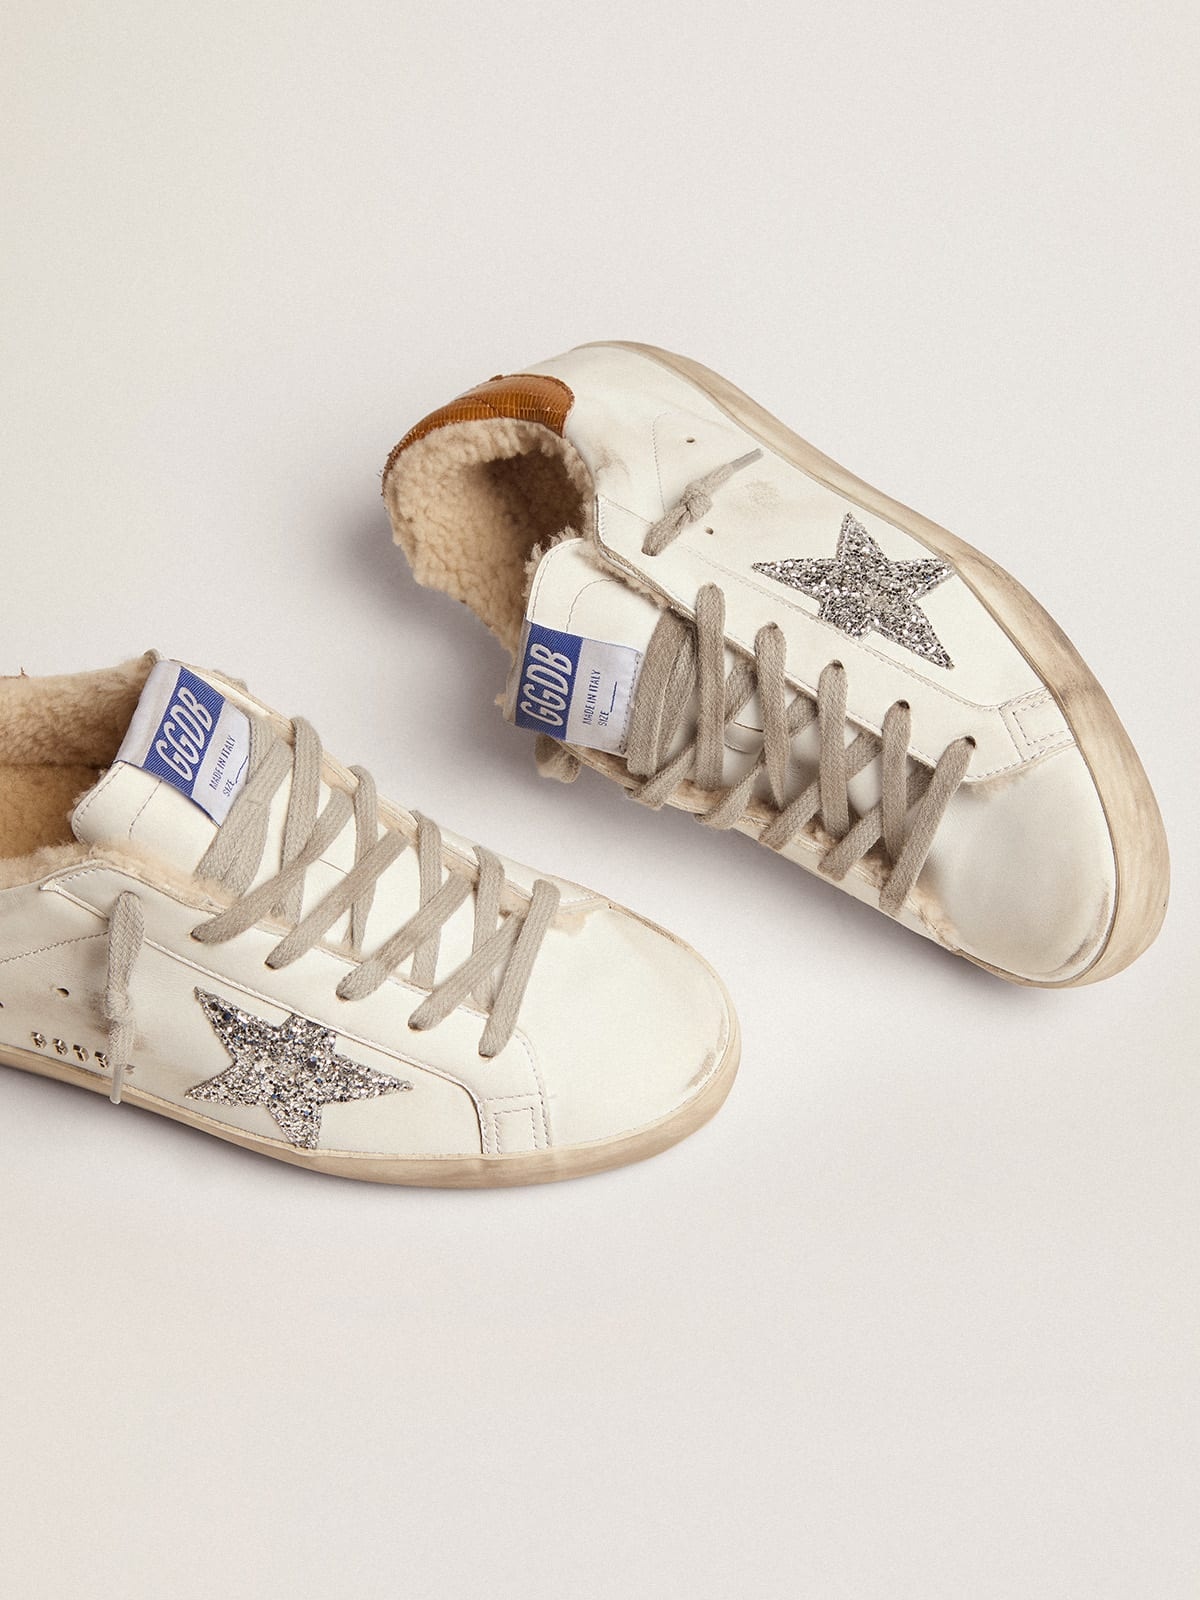 Super-Star sneakers with shearling lining, silver glitter star and lizard-print dove-gray leather he - 2